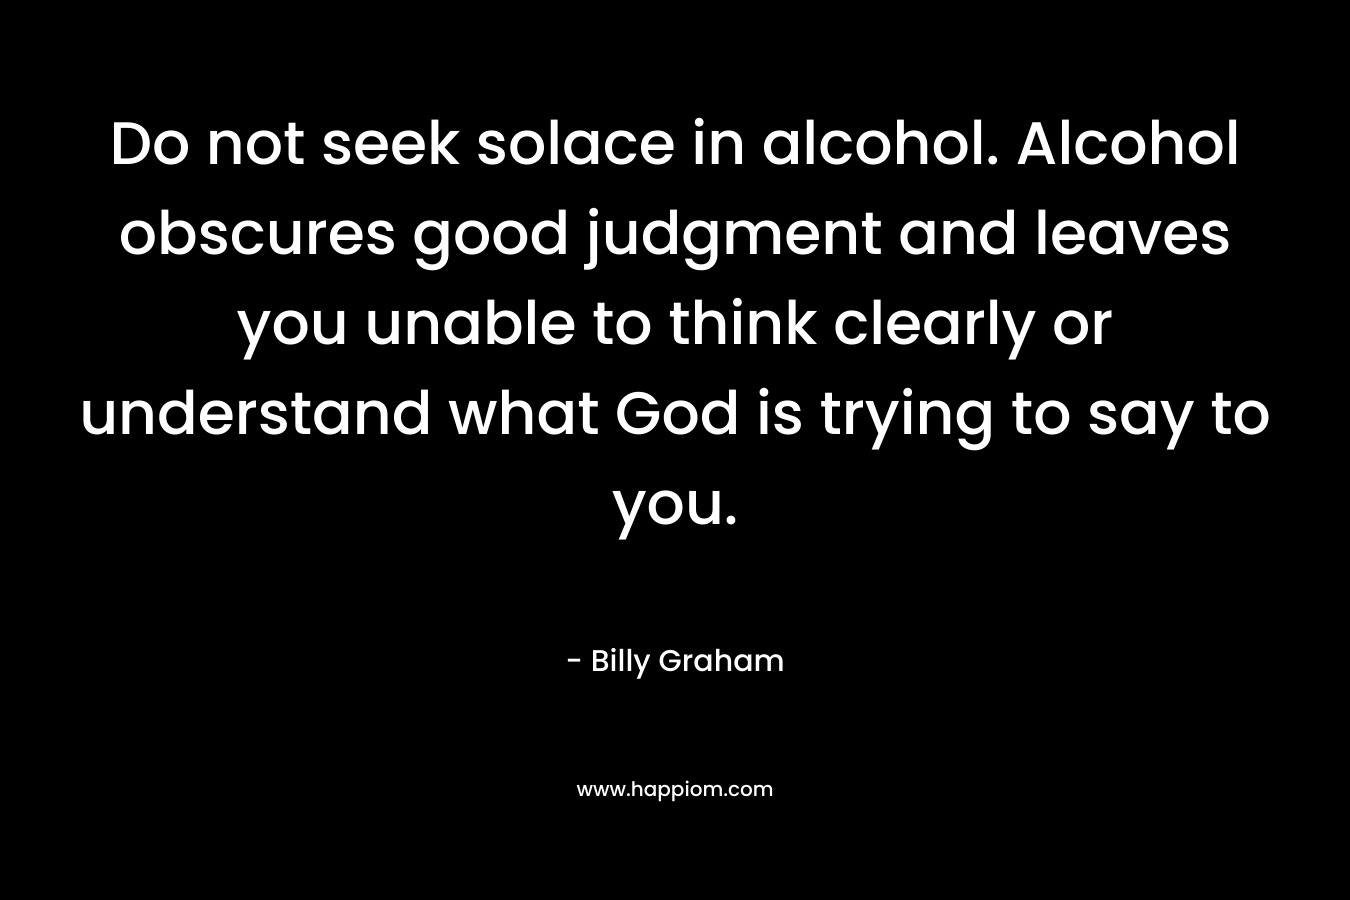 Do not seek solace in alcohol. Alcohol obscures good judgment and leaves you unable to think clearly or understand what God is trying to say to you.